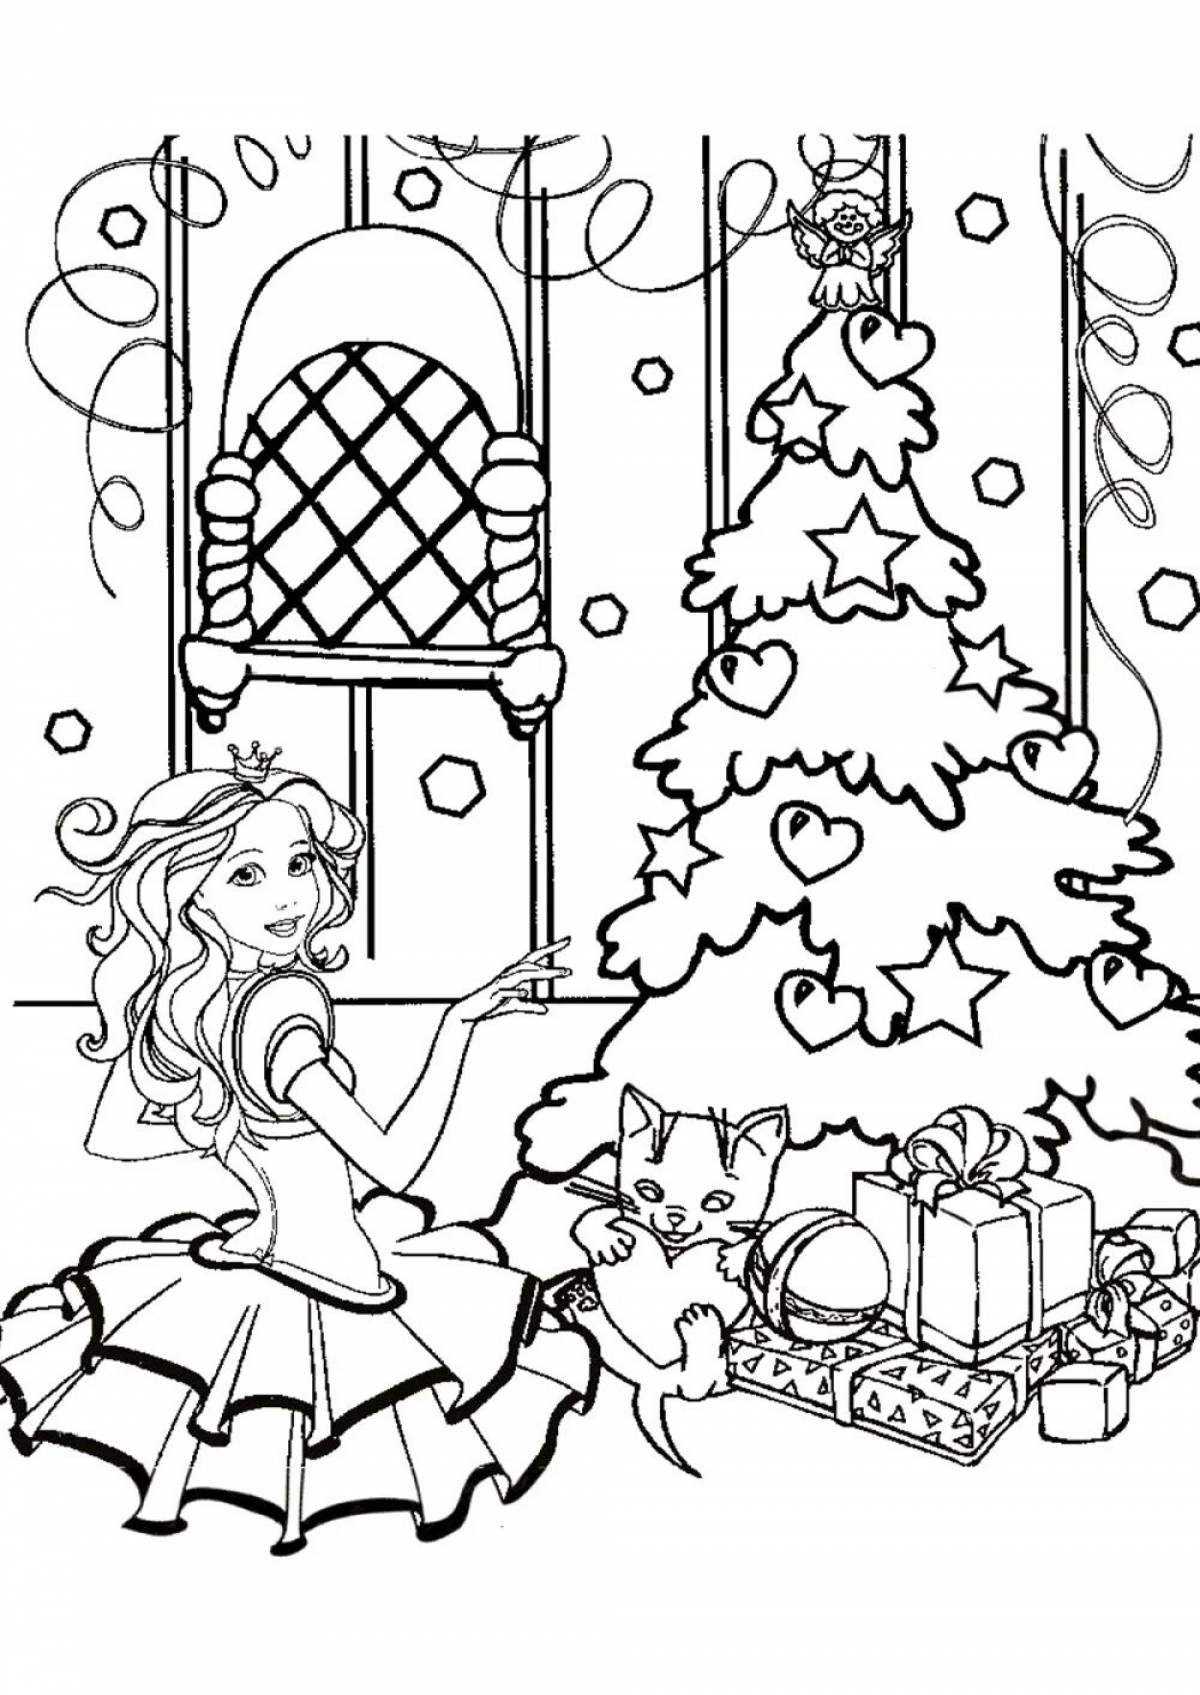 Live Christmas coloring book for girls 10 years old